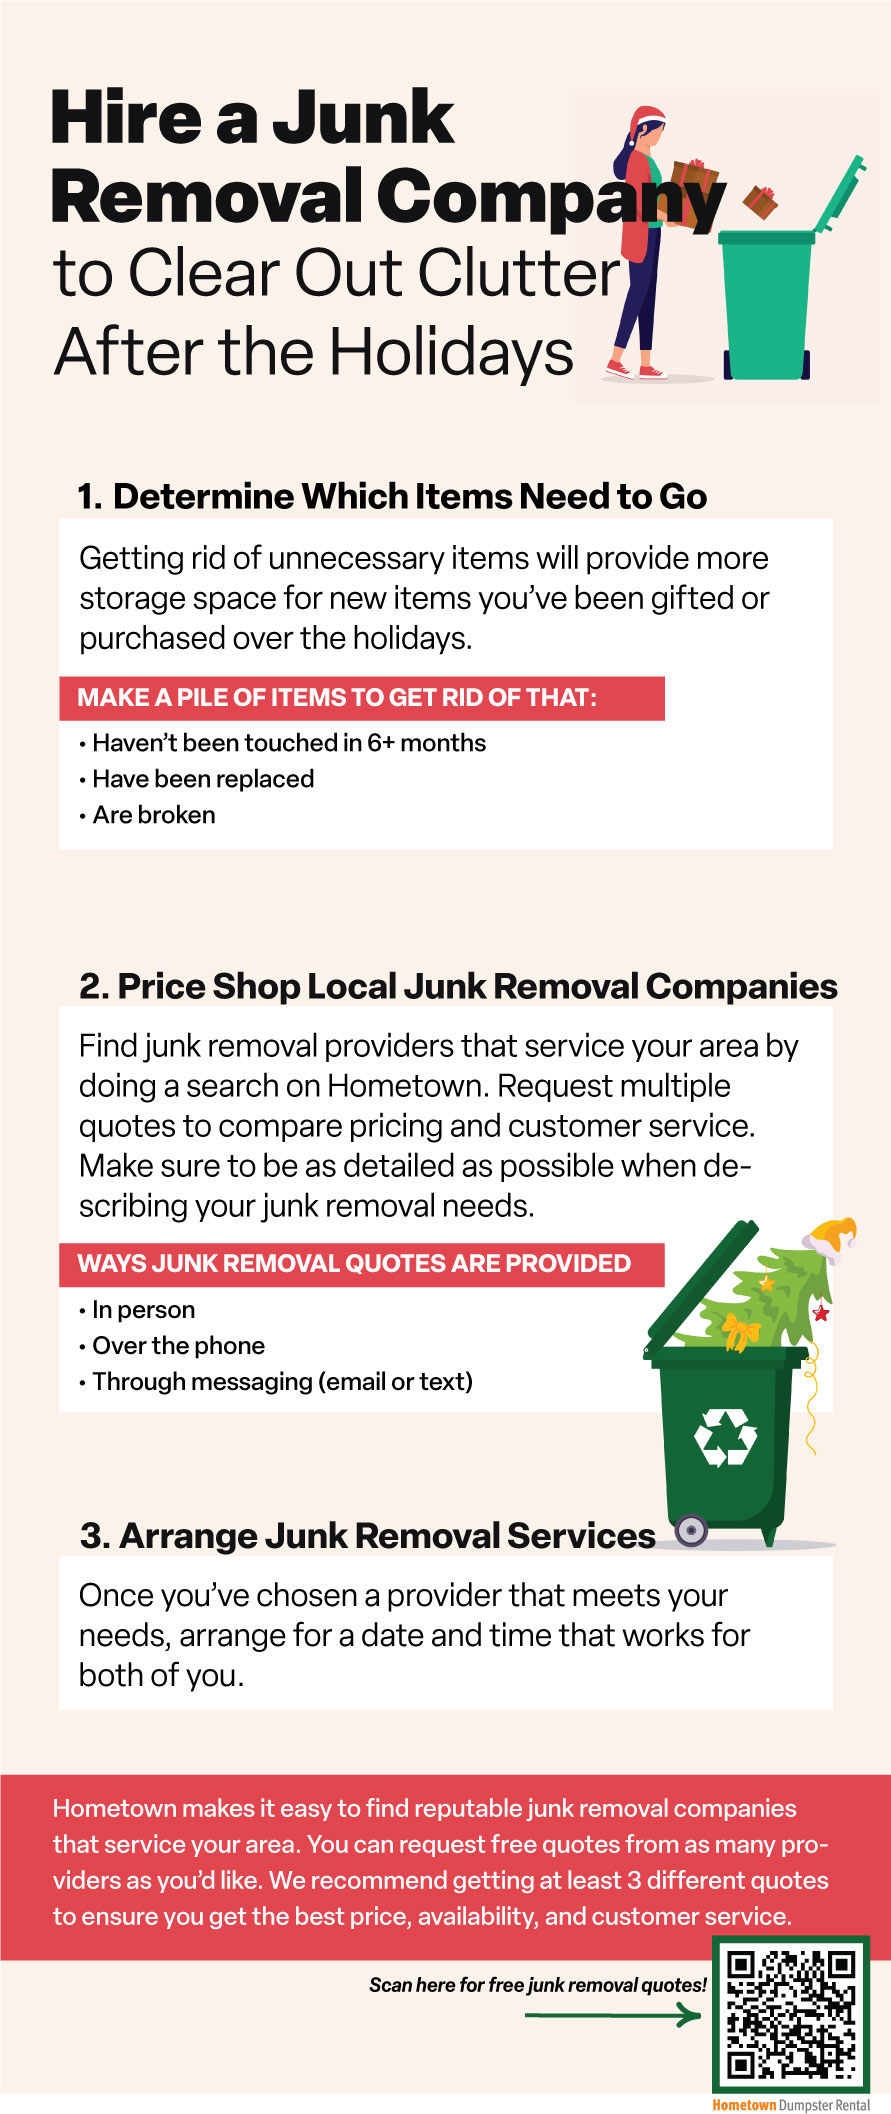 Hire a Junk Removal Service to Clear Out Clutter After the Holidays Infographic